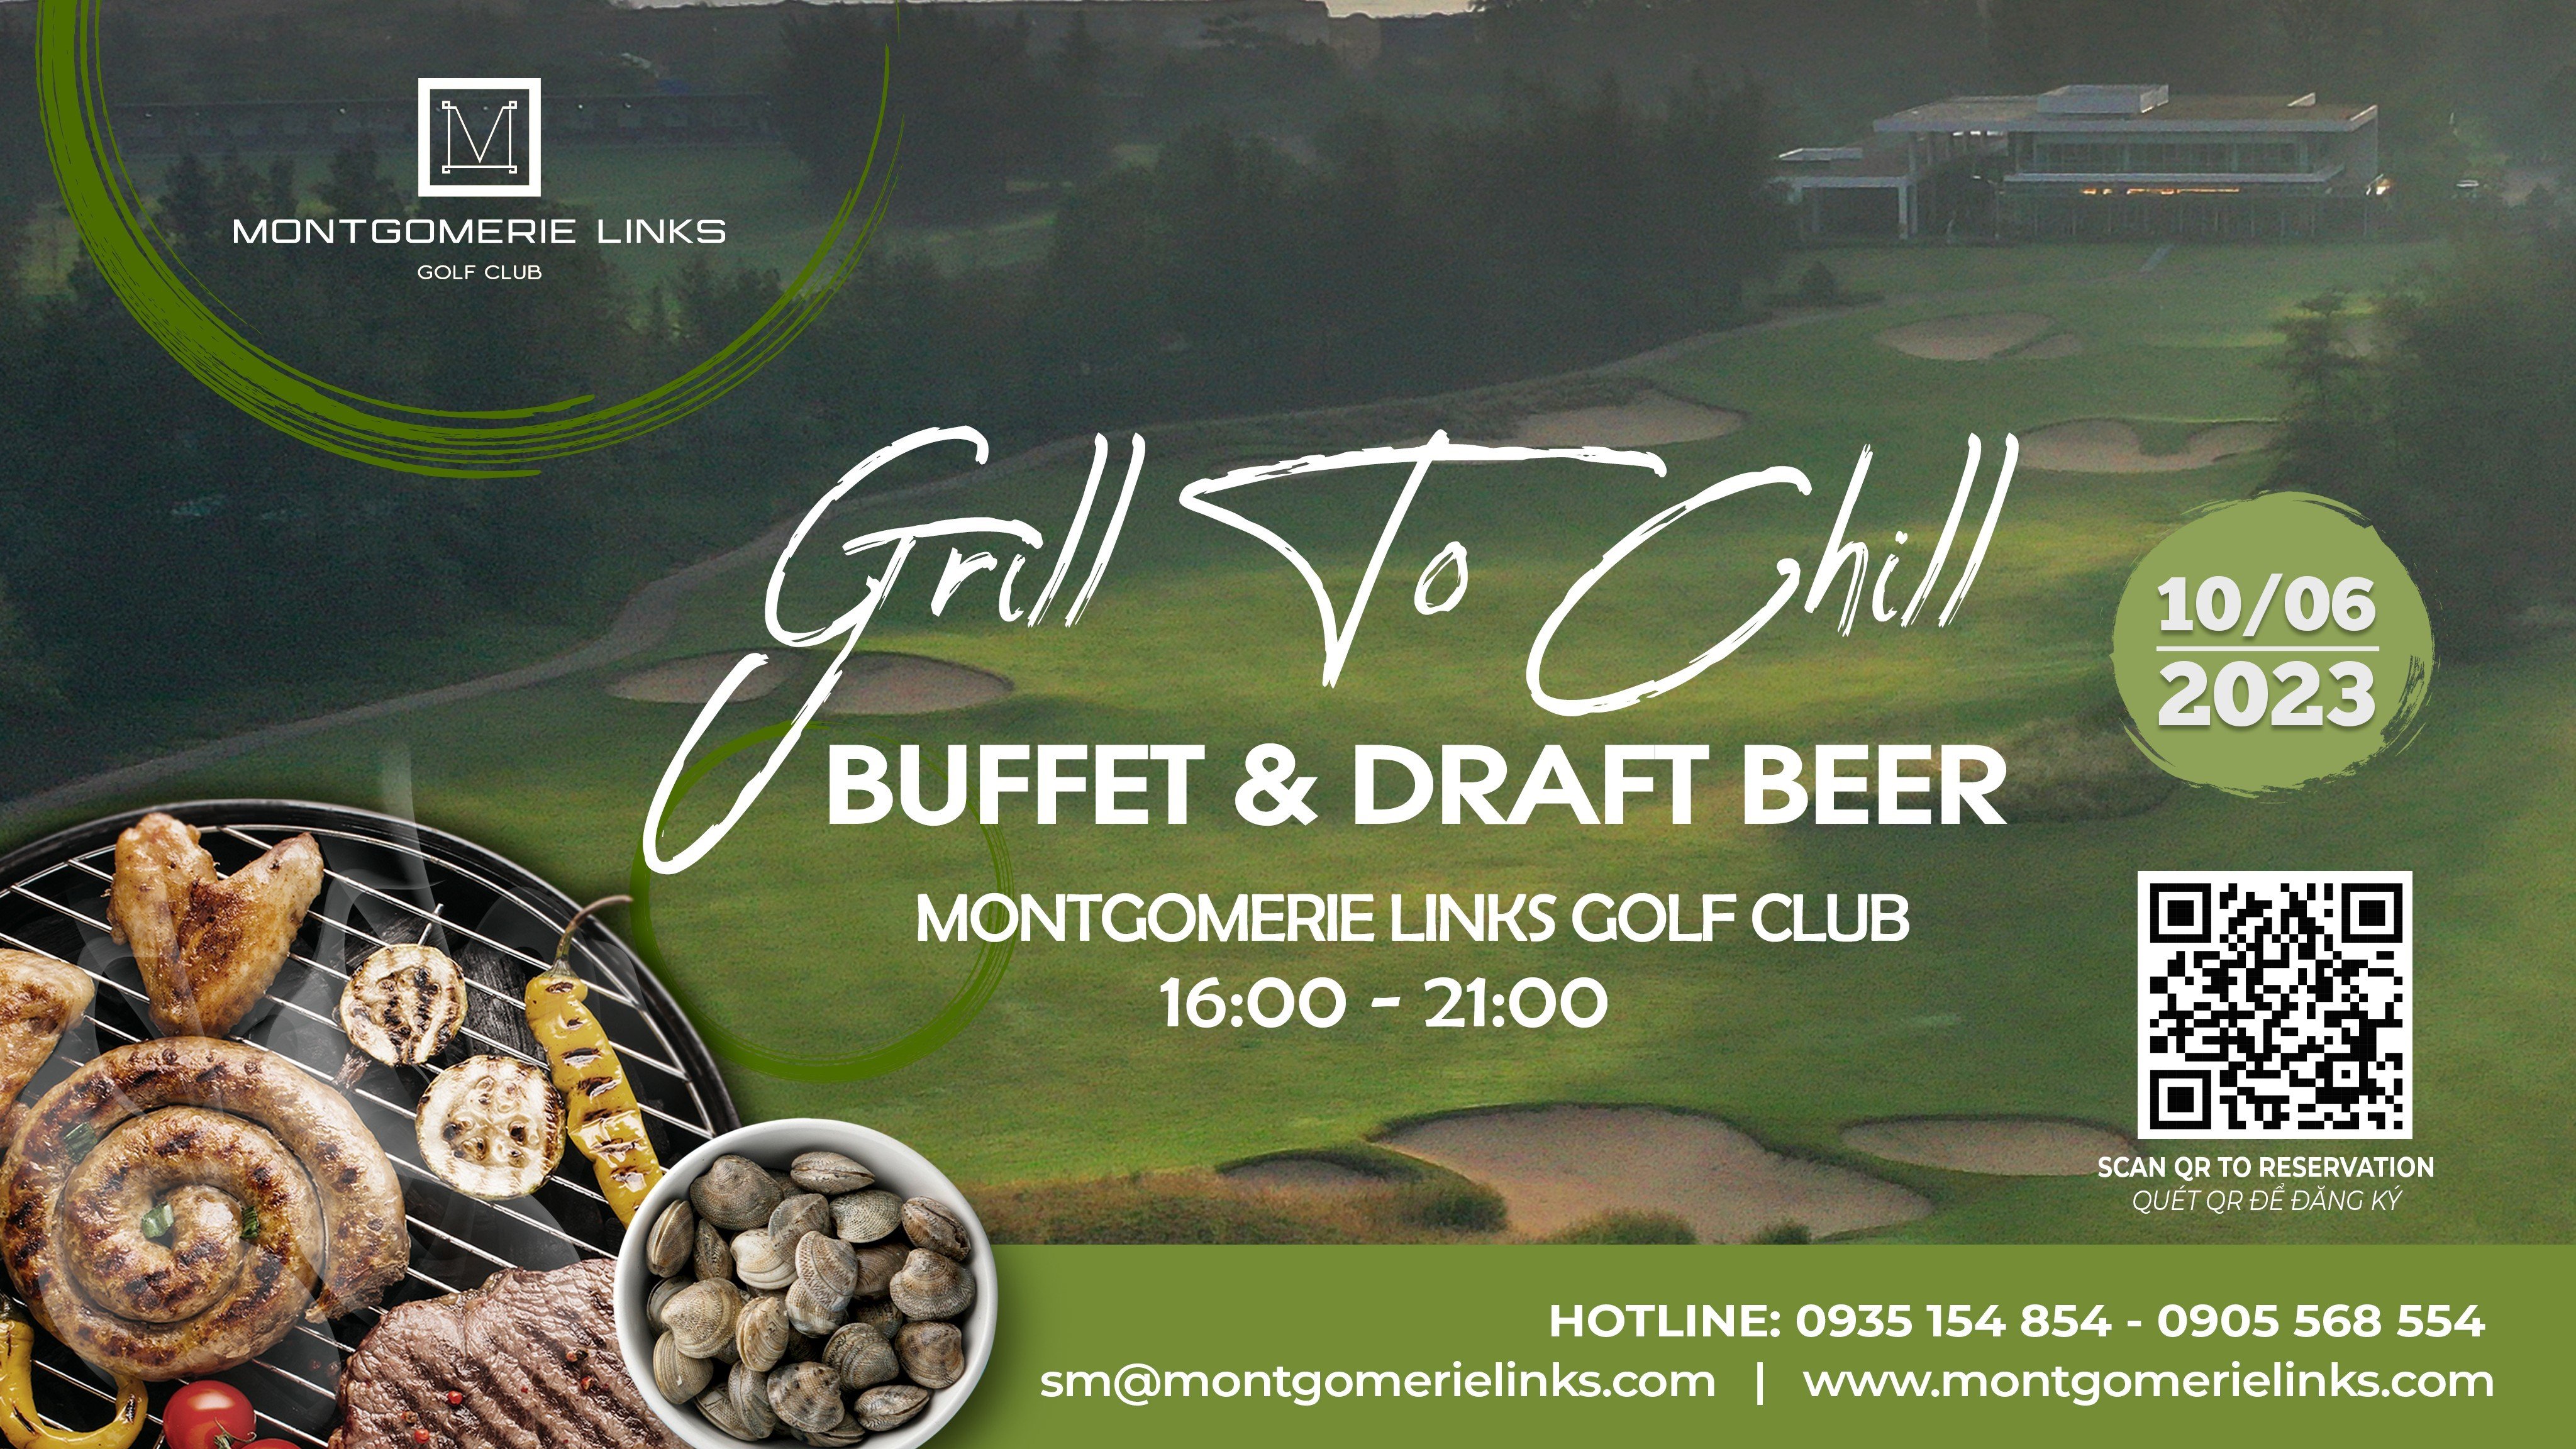 GRILL TO CHILL - THE IRRESISTIBLY DELICIOUS BUFFET & DRAFT BEER IS BACK!